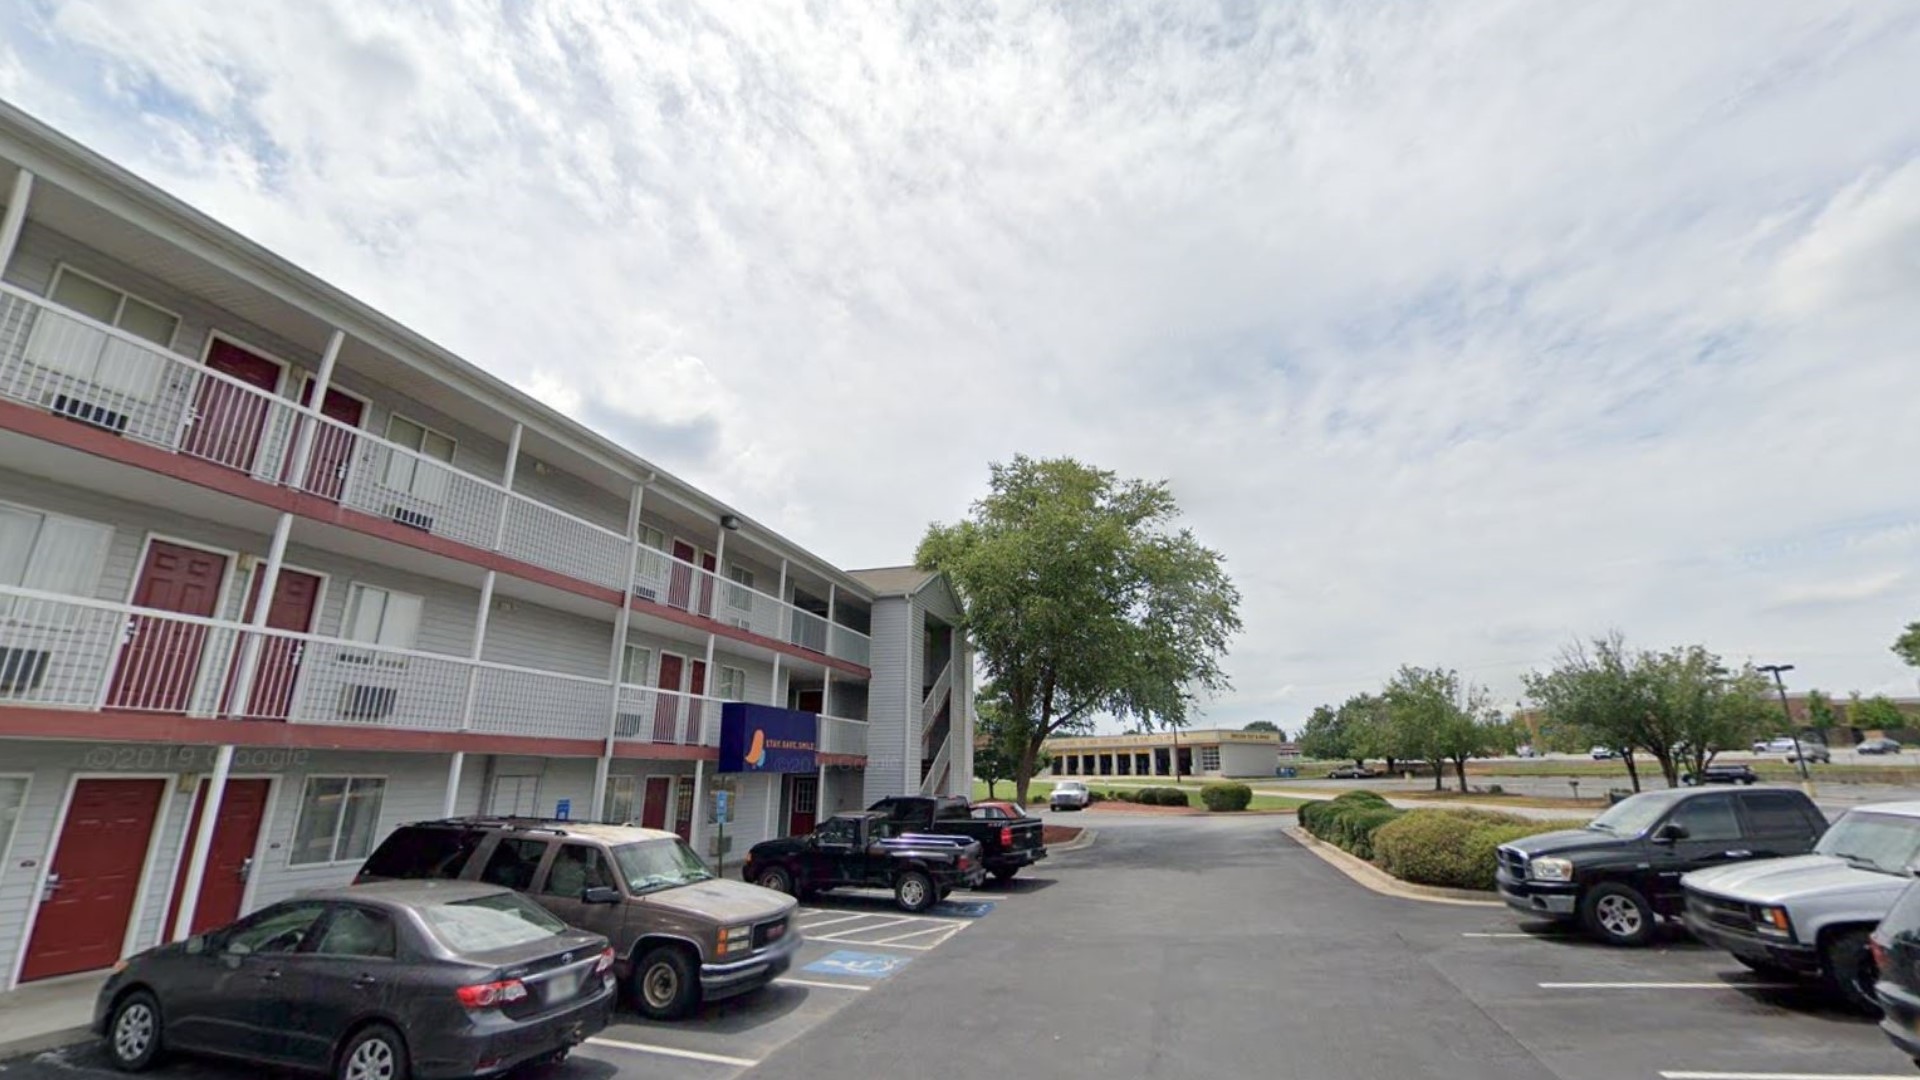 Conyers Police are investigating after they found a man who had been shot and killed inside his pick-up truck at an extended-stay hotel Sunday morning.